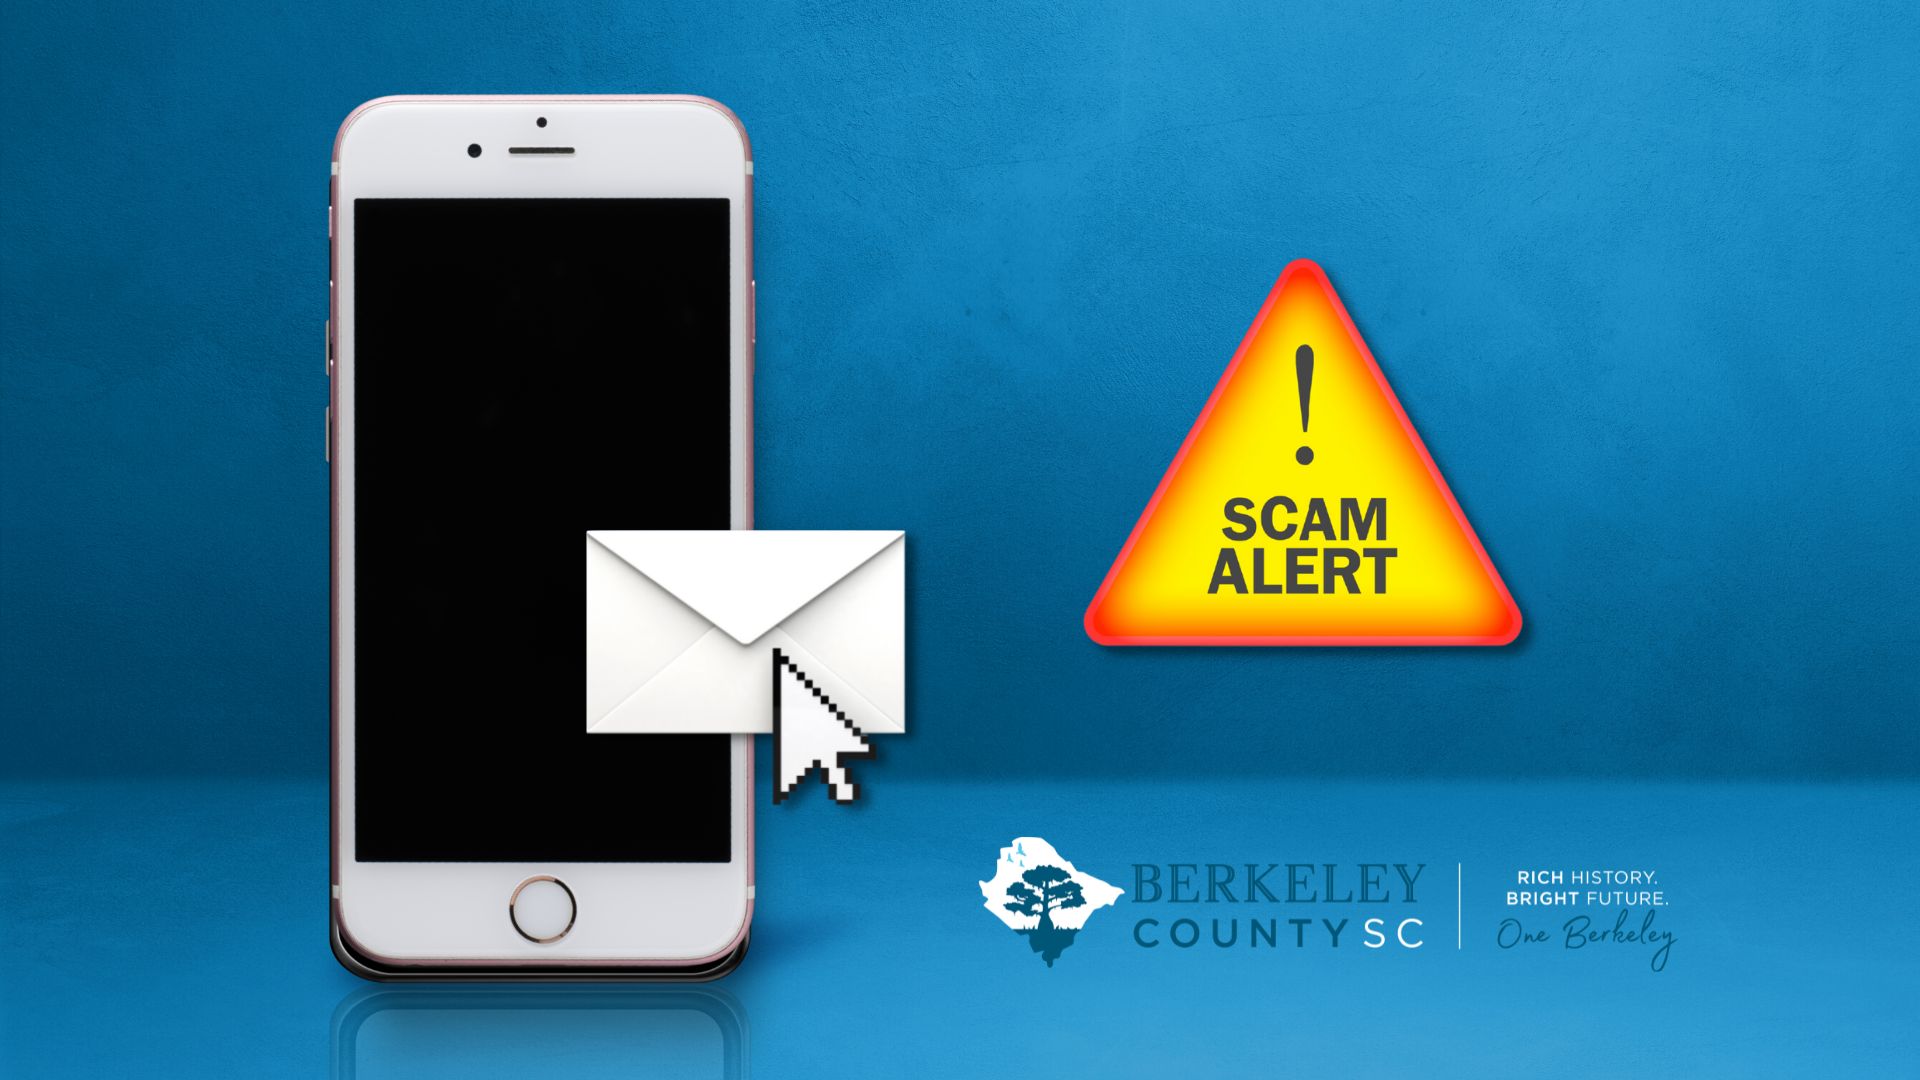 Berkeley County Warns of Phone and Email Scams